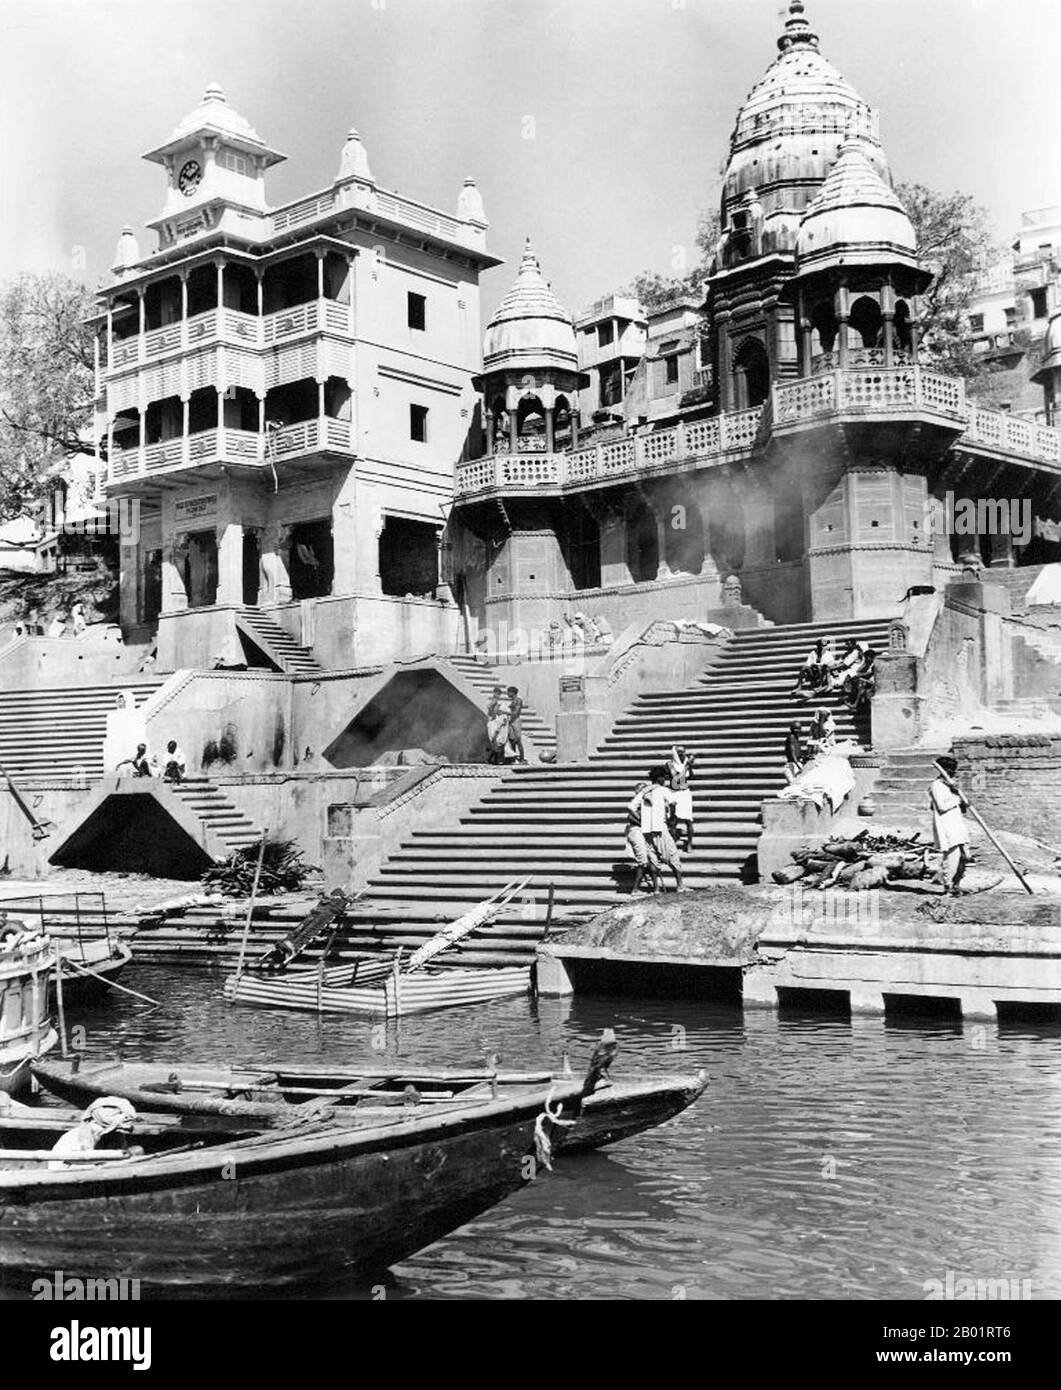 India: Manikarnika Ghat, Varanasi (Benares) c. 1952.  Varanasi, also commonly known as Banaras or Benaras, is a city situated on the banks of the River Ganges in the Indian state of Uttar Pradesh, 320 kilometres (199 mi) southeast of state capital Lucknow. It is regarded as a holy city by Hindus, Buddhists and Jains. It is one of the oldest continuously inhabited cities in the world and the oldest in India.  The Kashi Naresh (Maharaja of Kashi) is the chief cultural patron of Varanasi and an essential part of all religious celebrations. Stock Photo